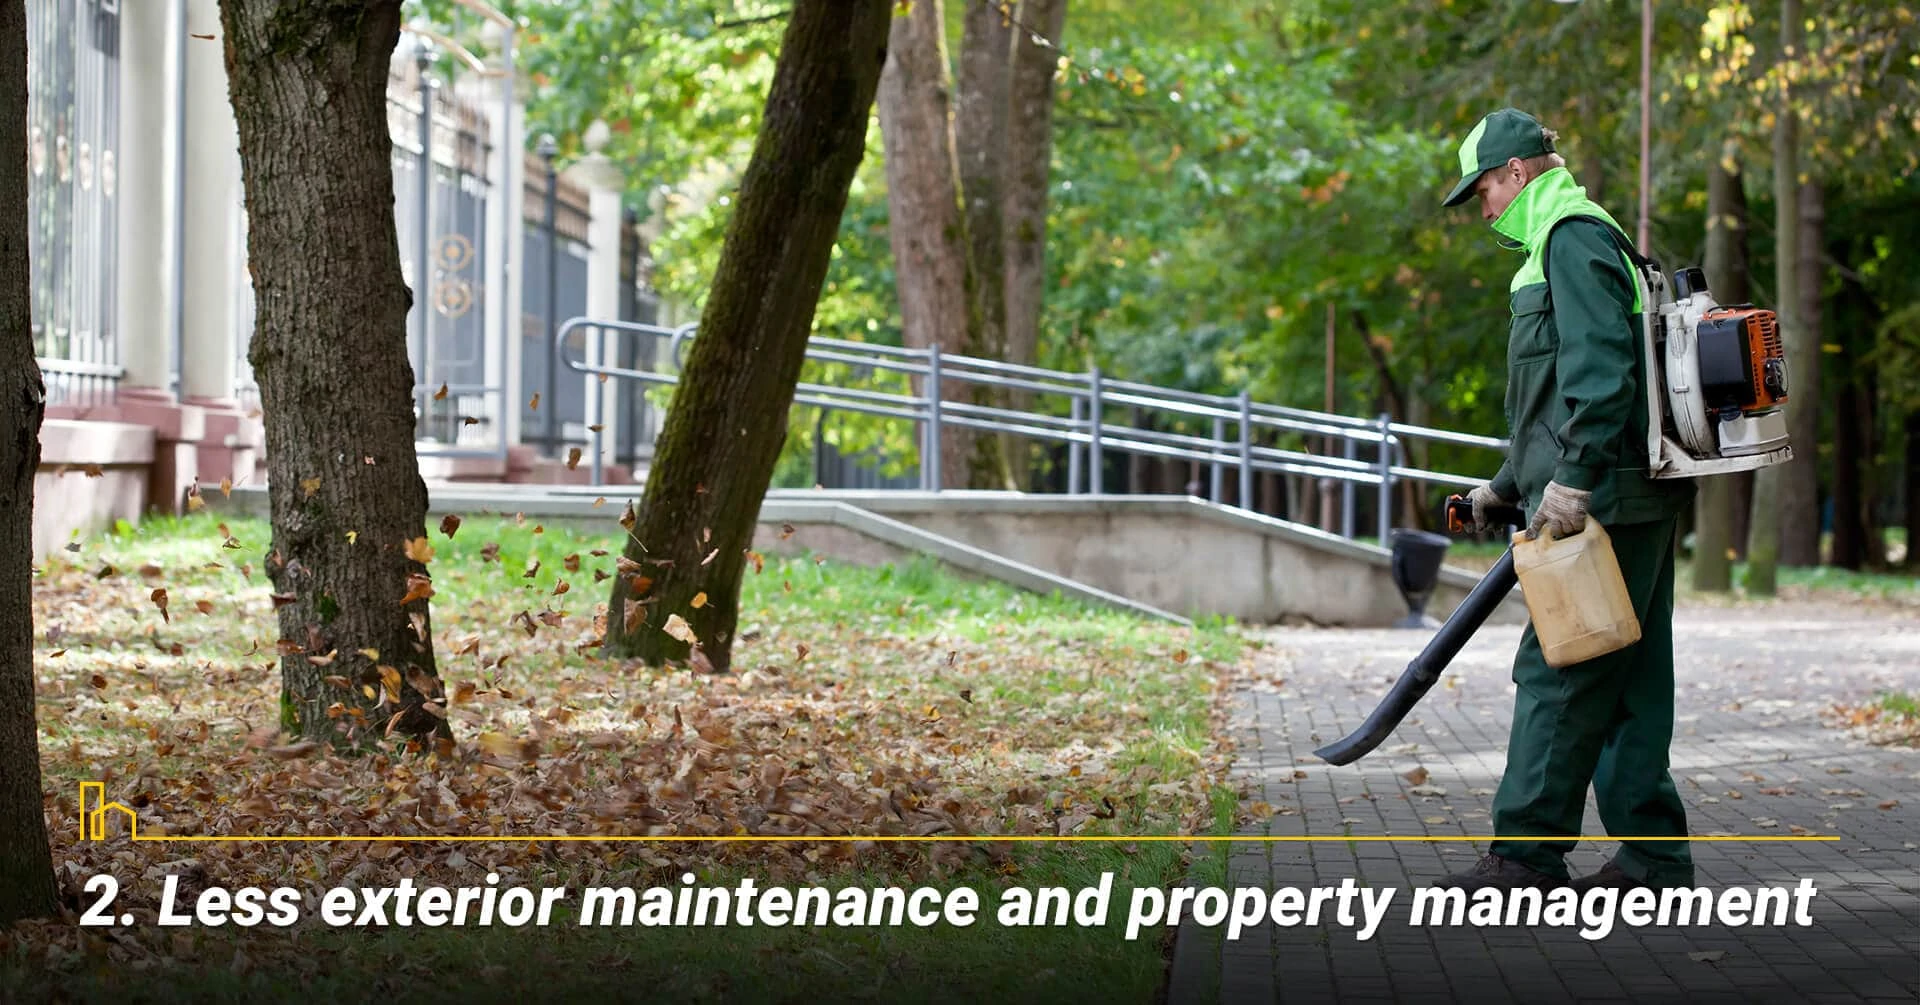 Less exterior maintenance and property management, no more yard works